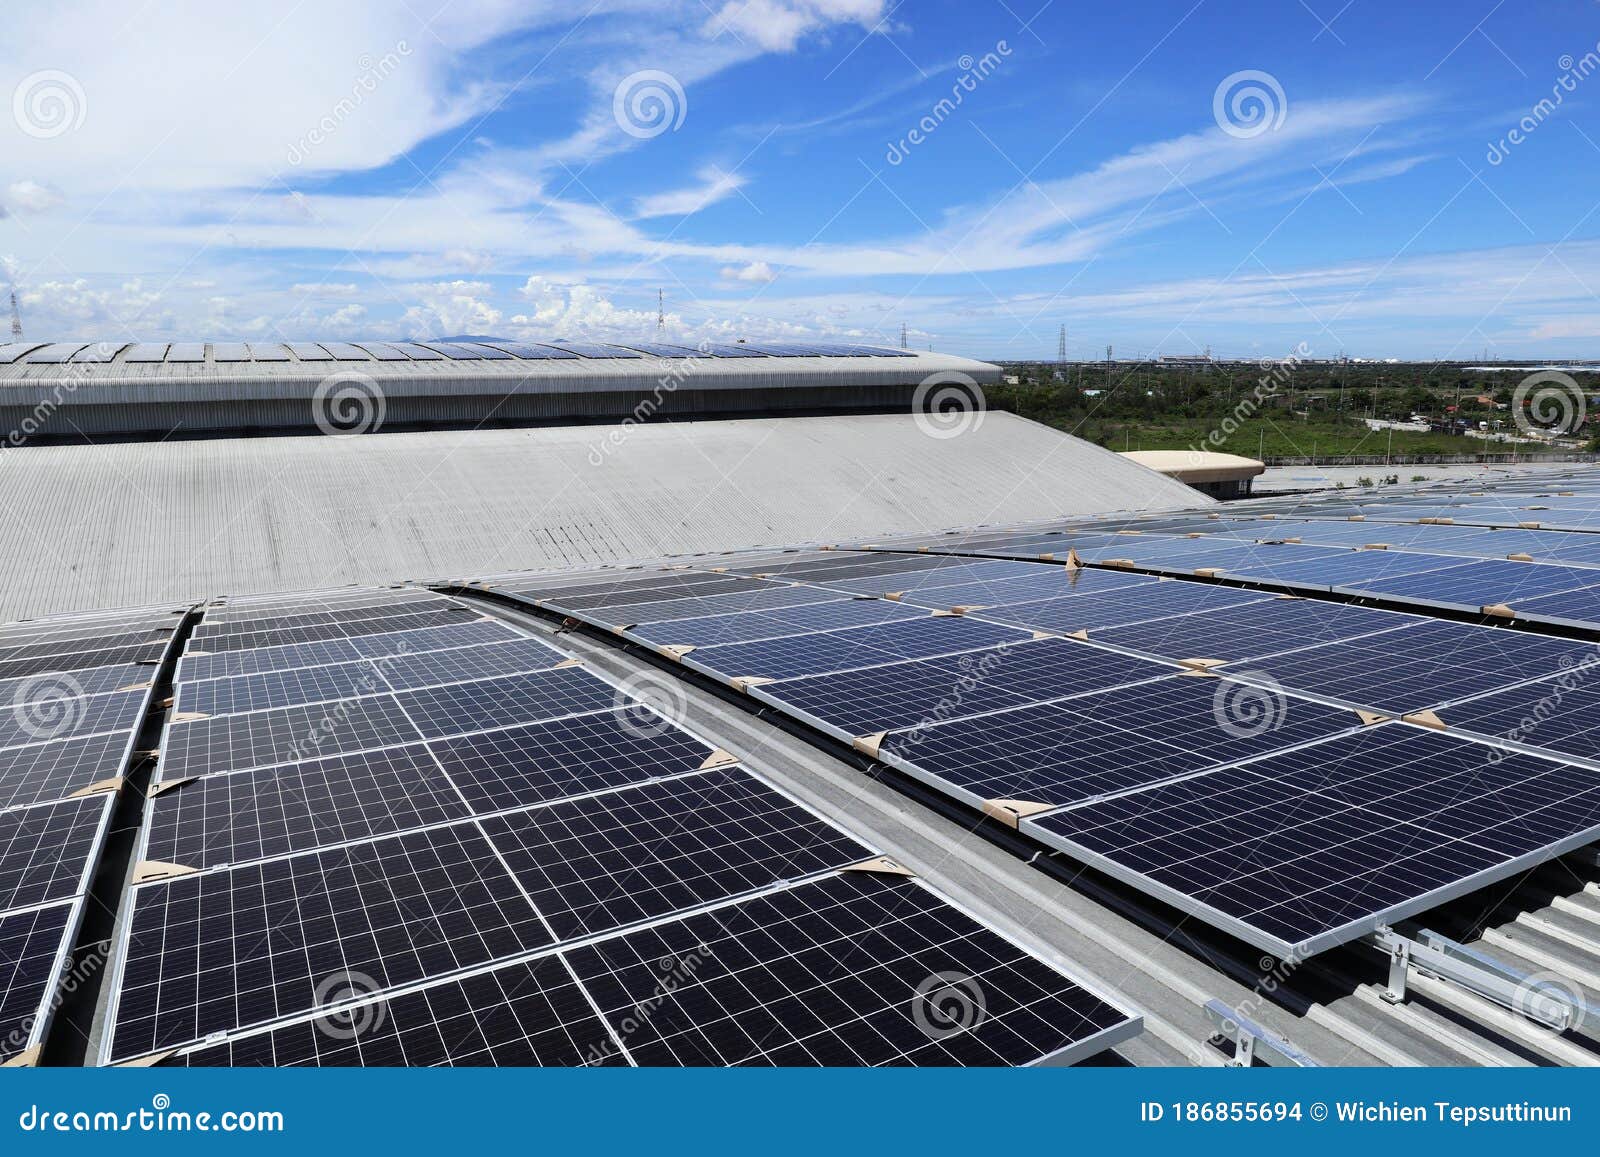 Solar Pv Rooftop On Curve Roof Under Construction Blue Sky Background Stock Photo Image Of Roof Stock